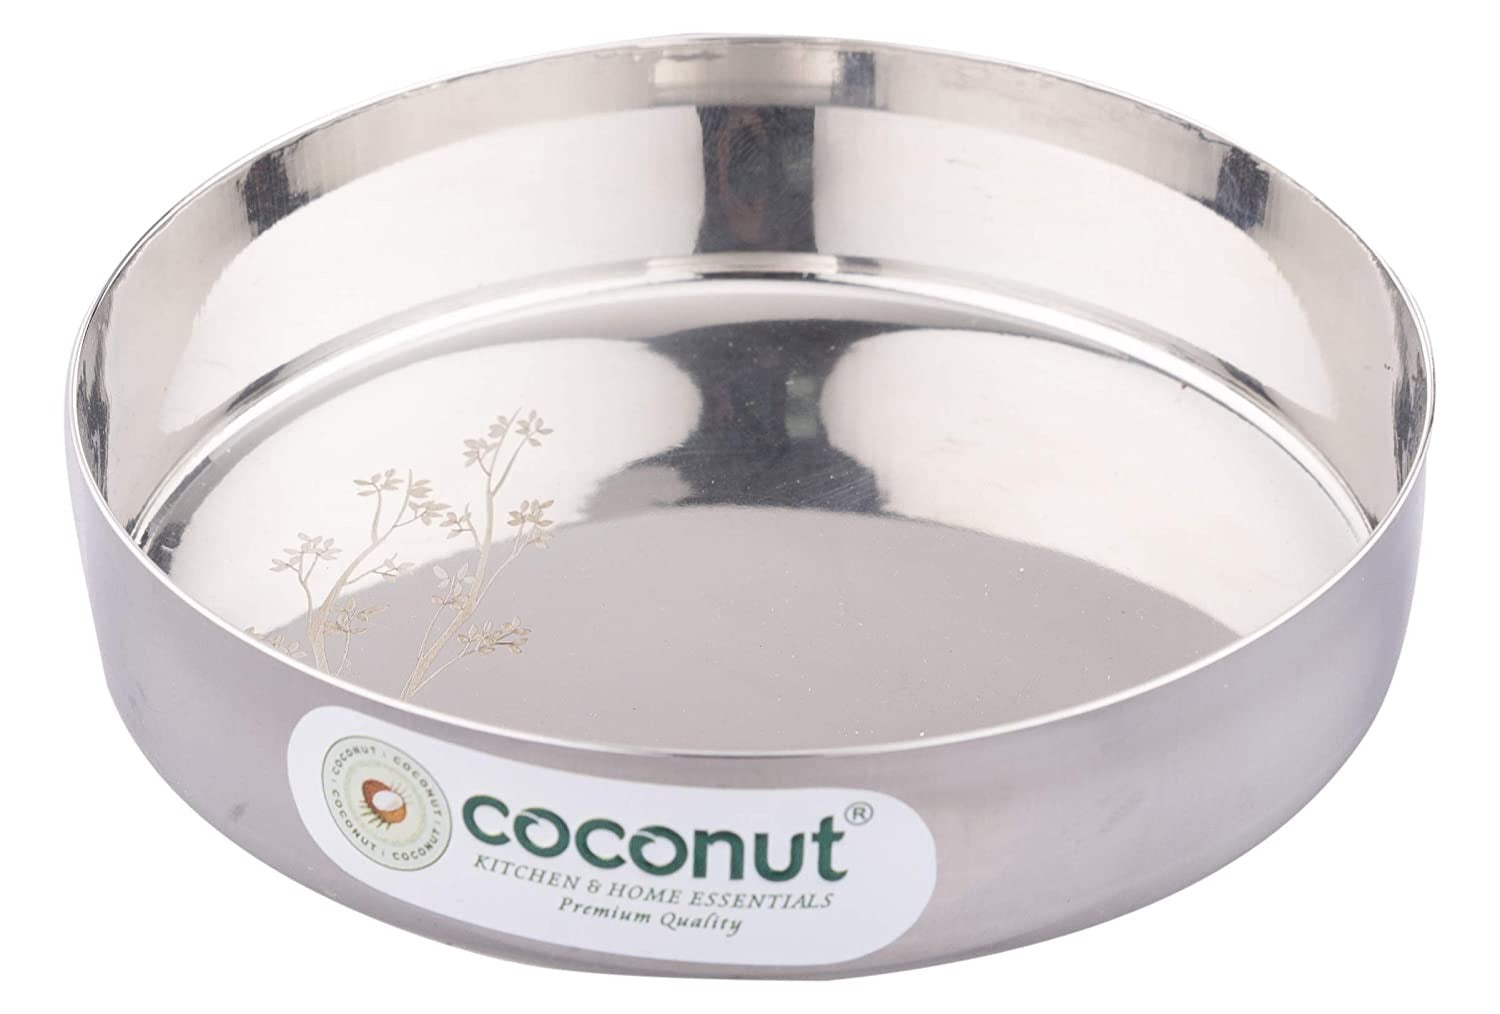 Detec Coconut Stainless Steel Nano Dinner Set with Laser Etching – Set of 5